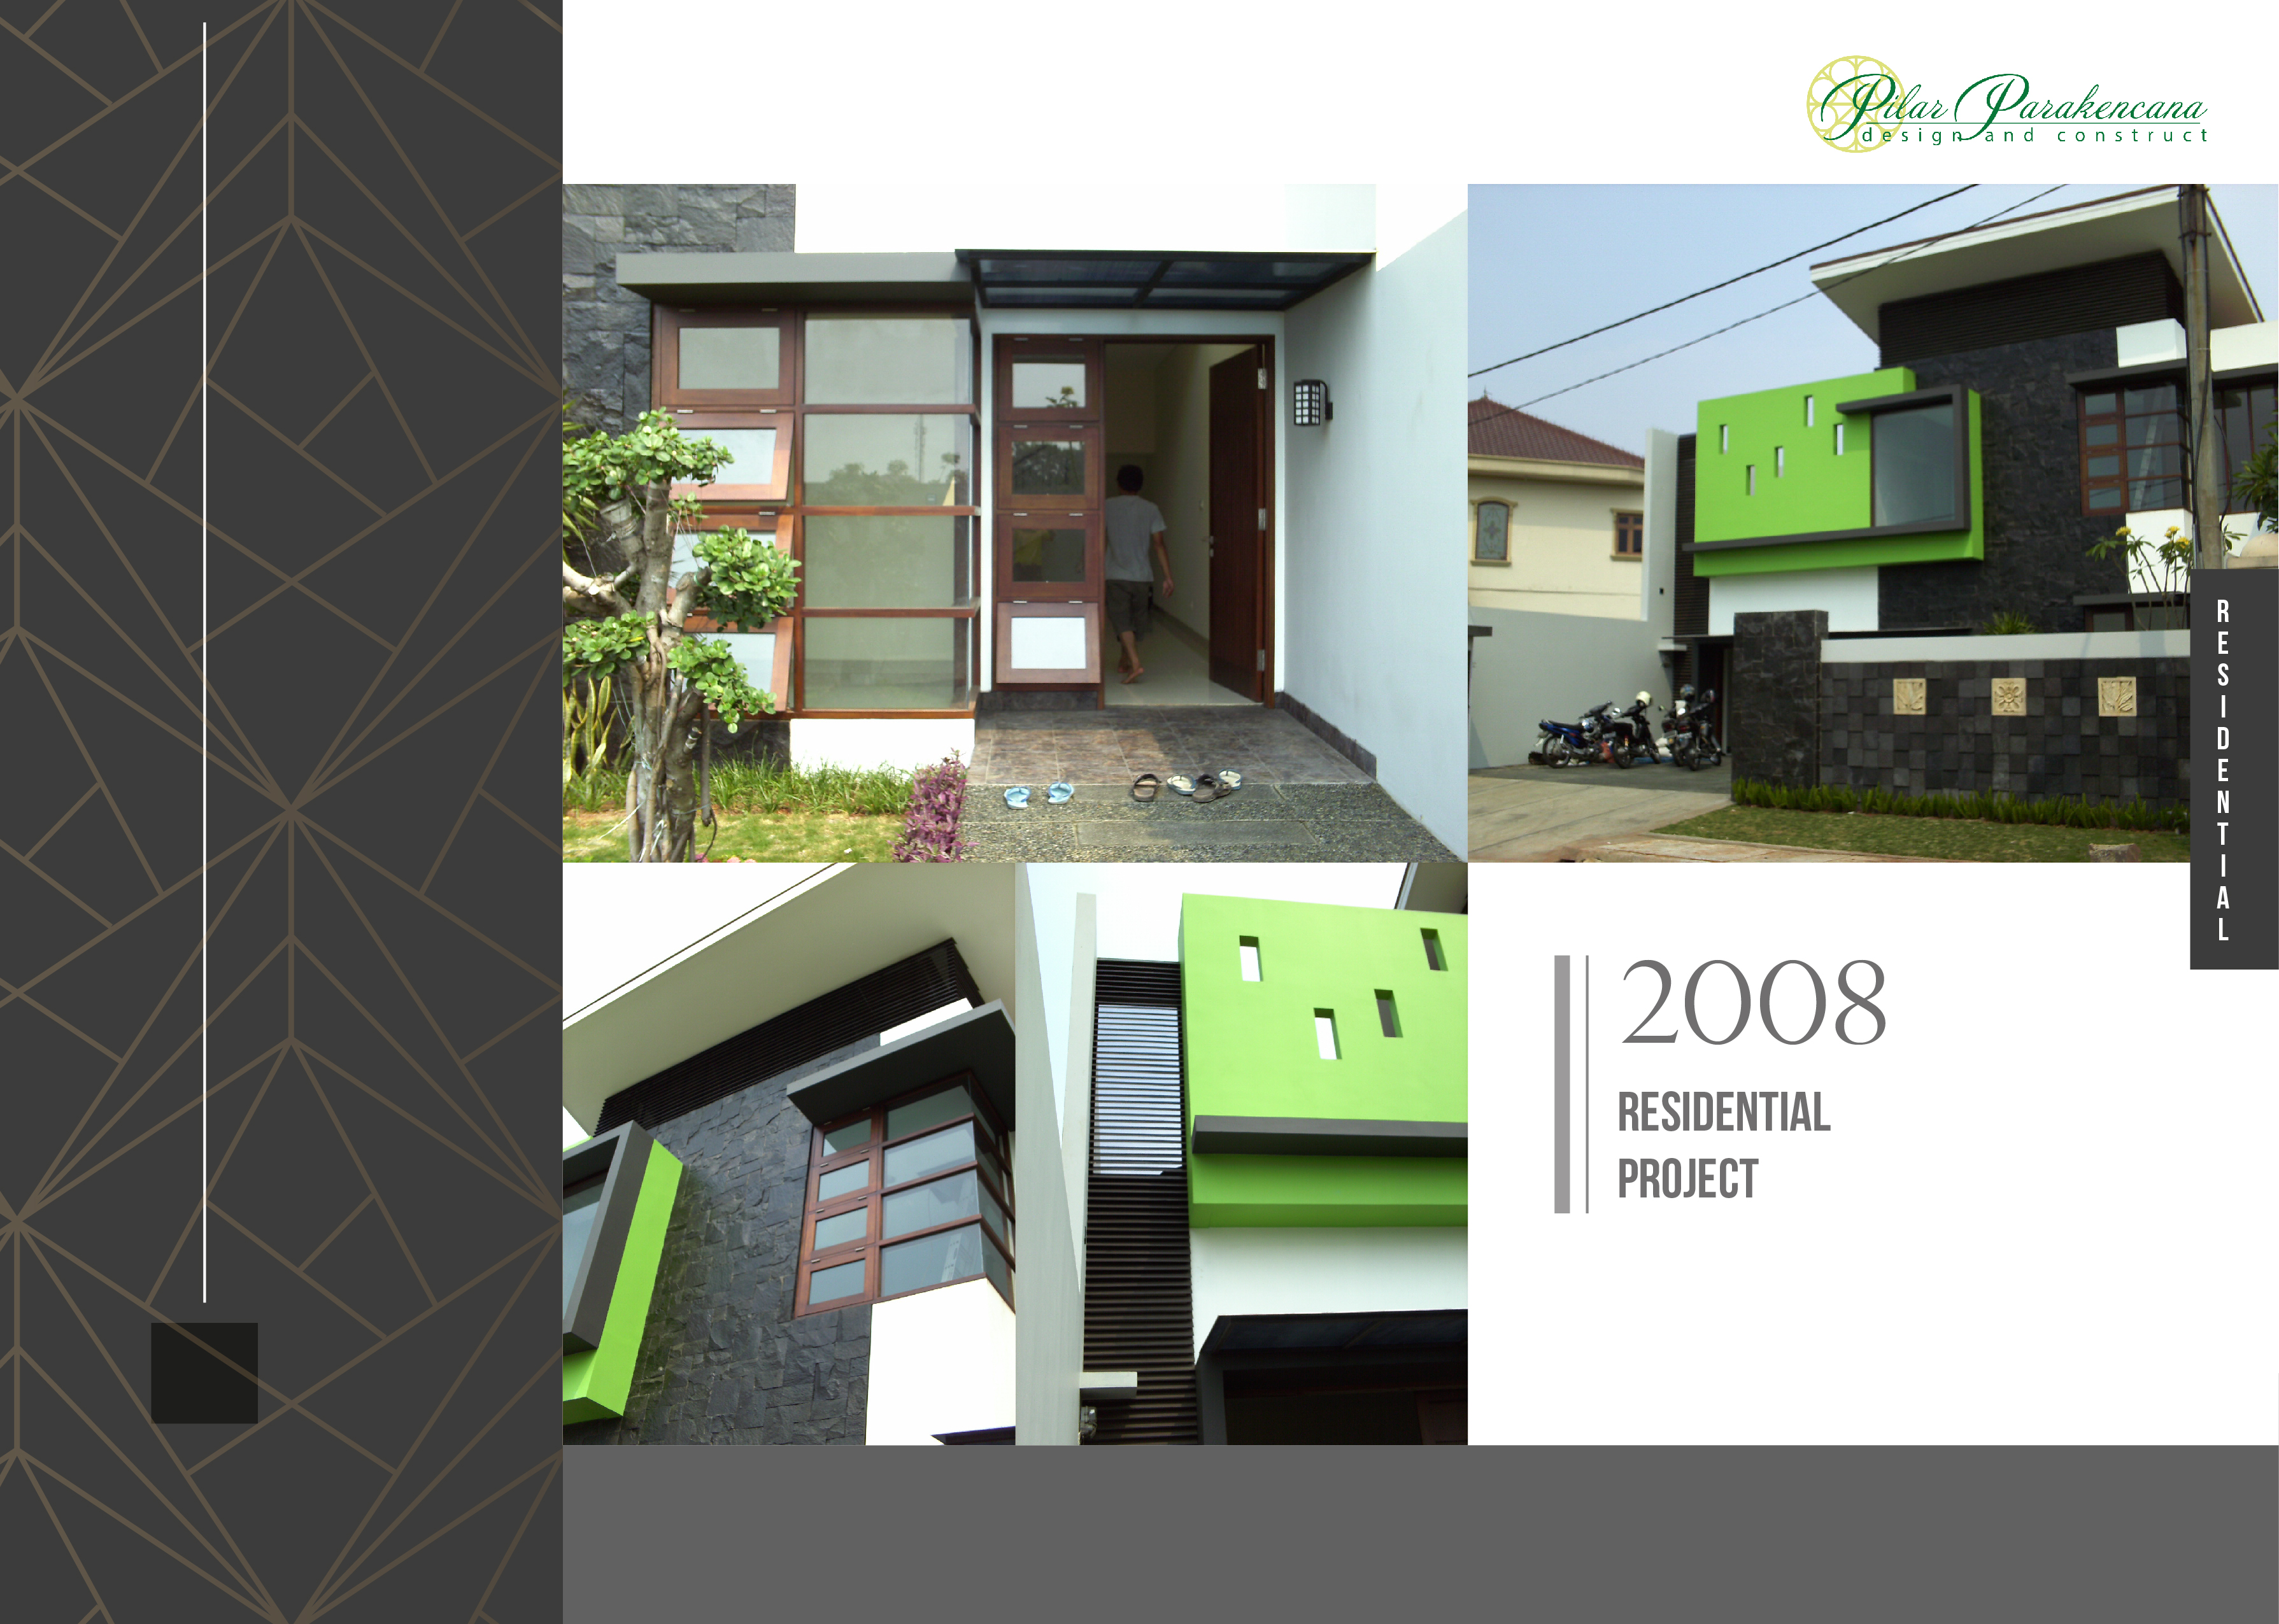 Residential Project - 2008